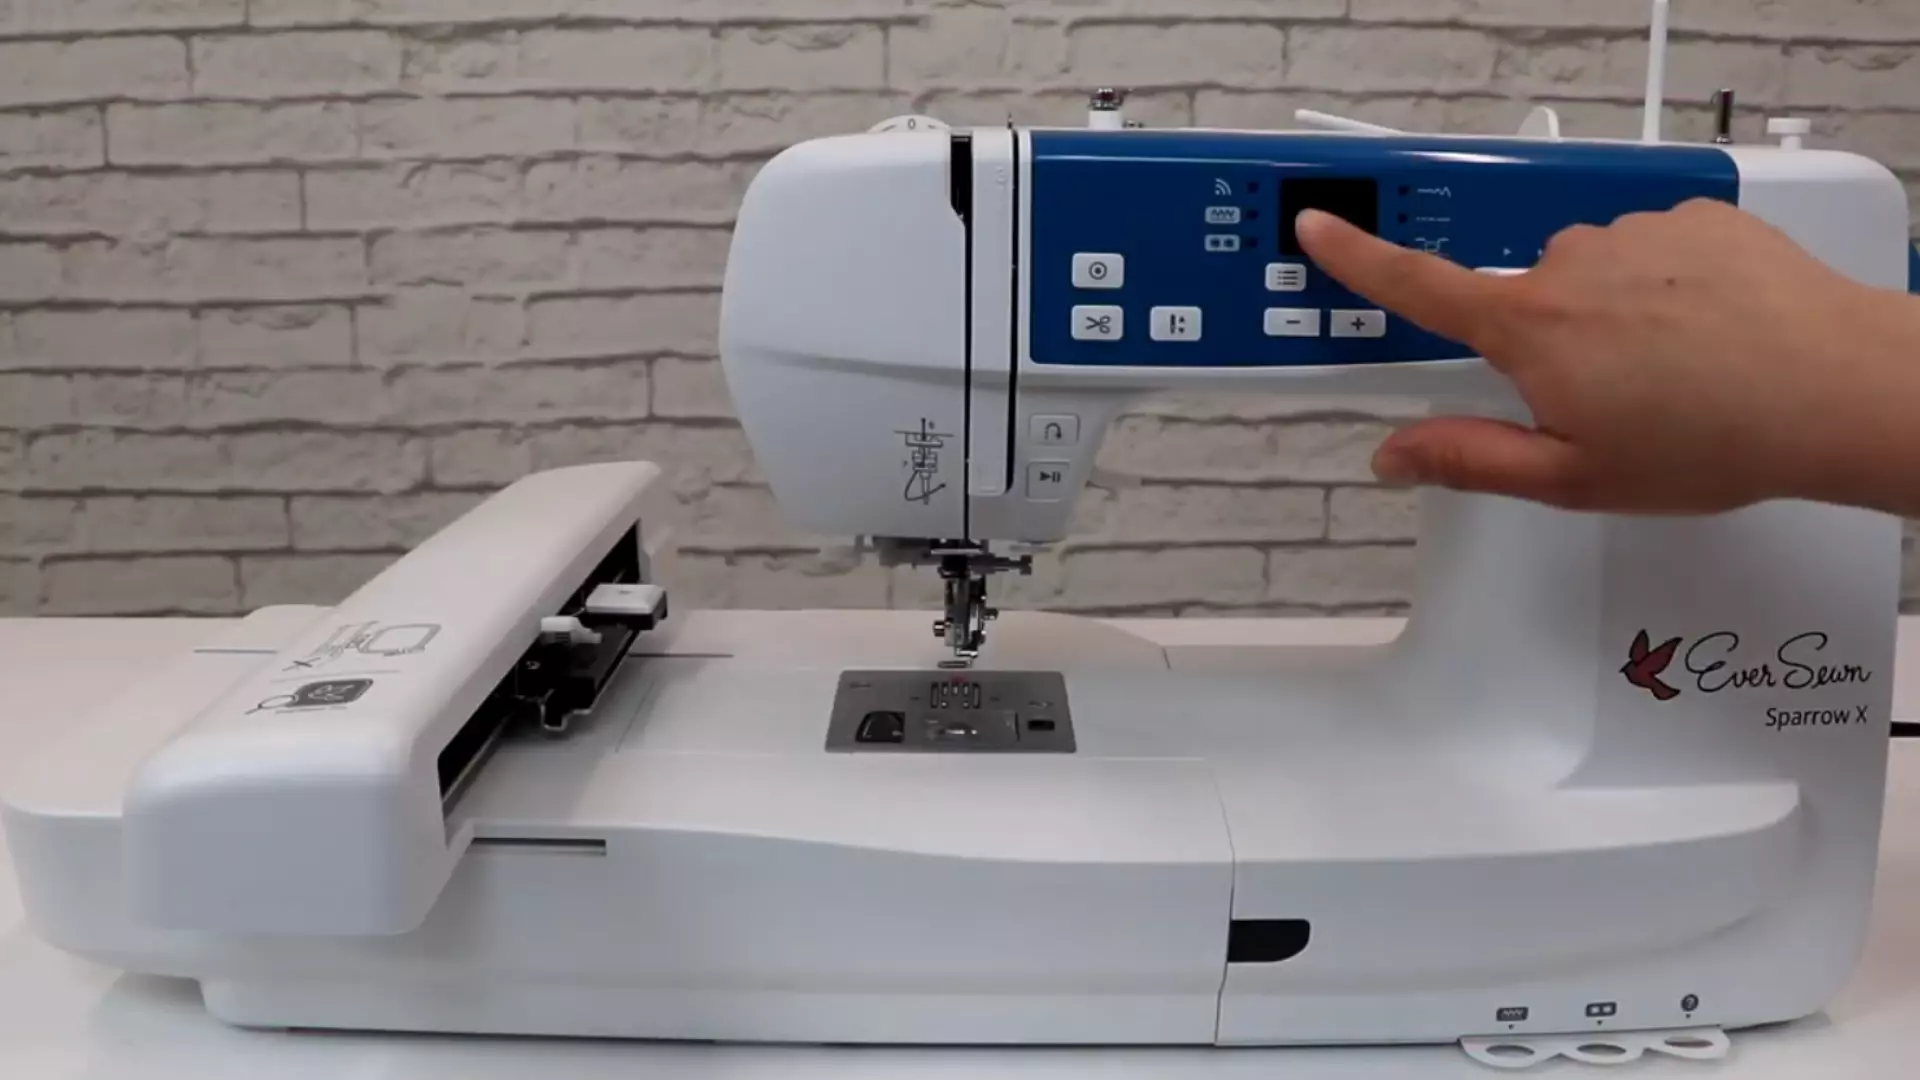 EverSewn Sparrow X Next-Generation Sewing and Embroidery Machine